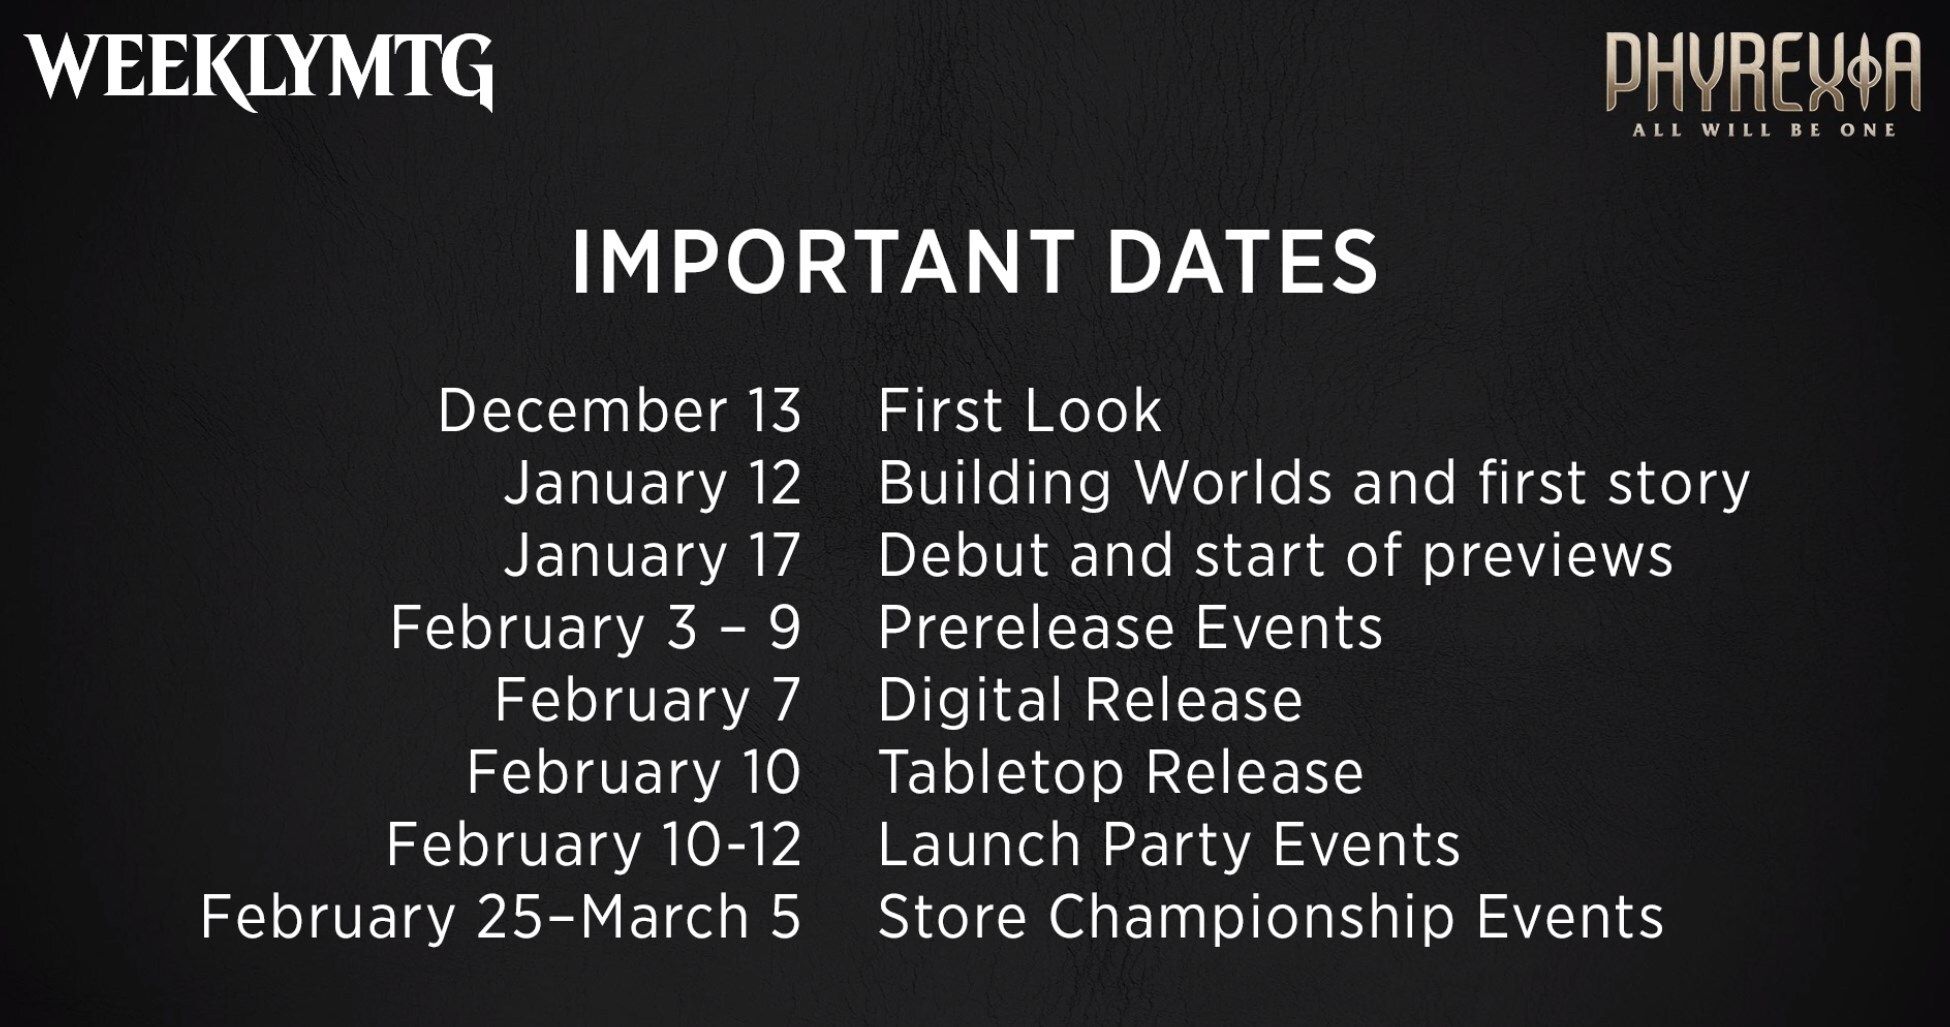 Magic Phyrexia All Will Be One Schedule